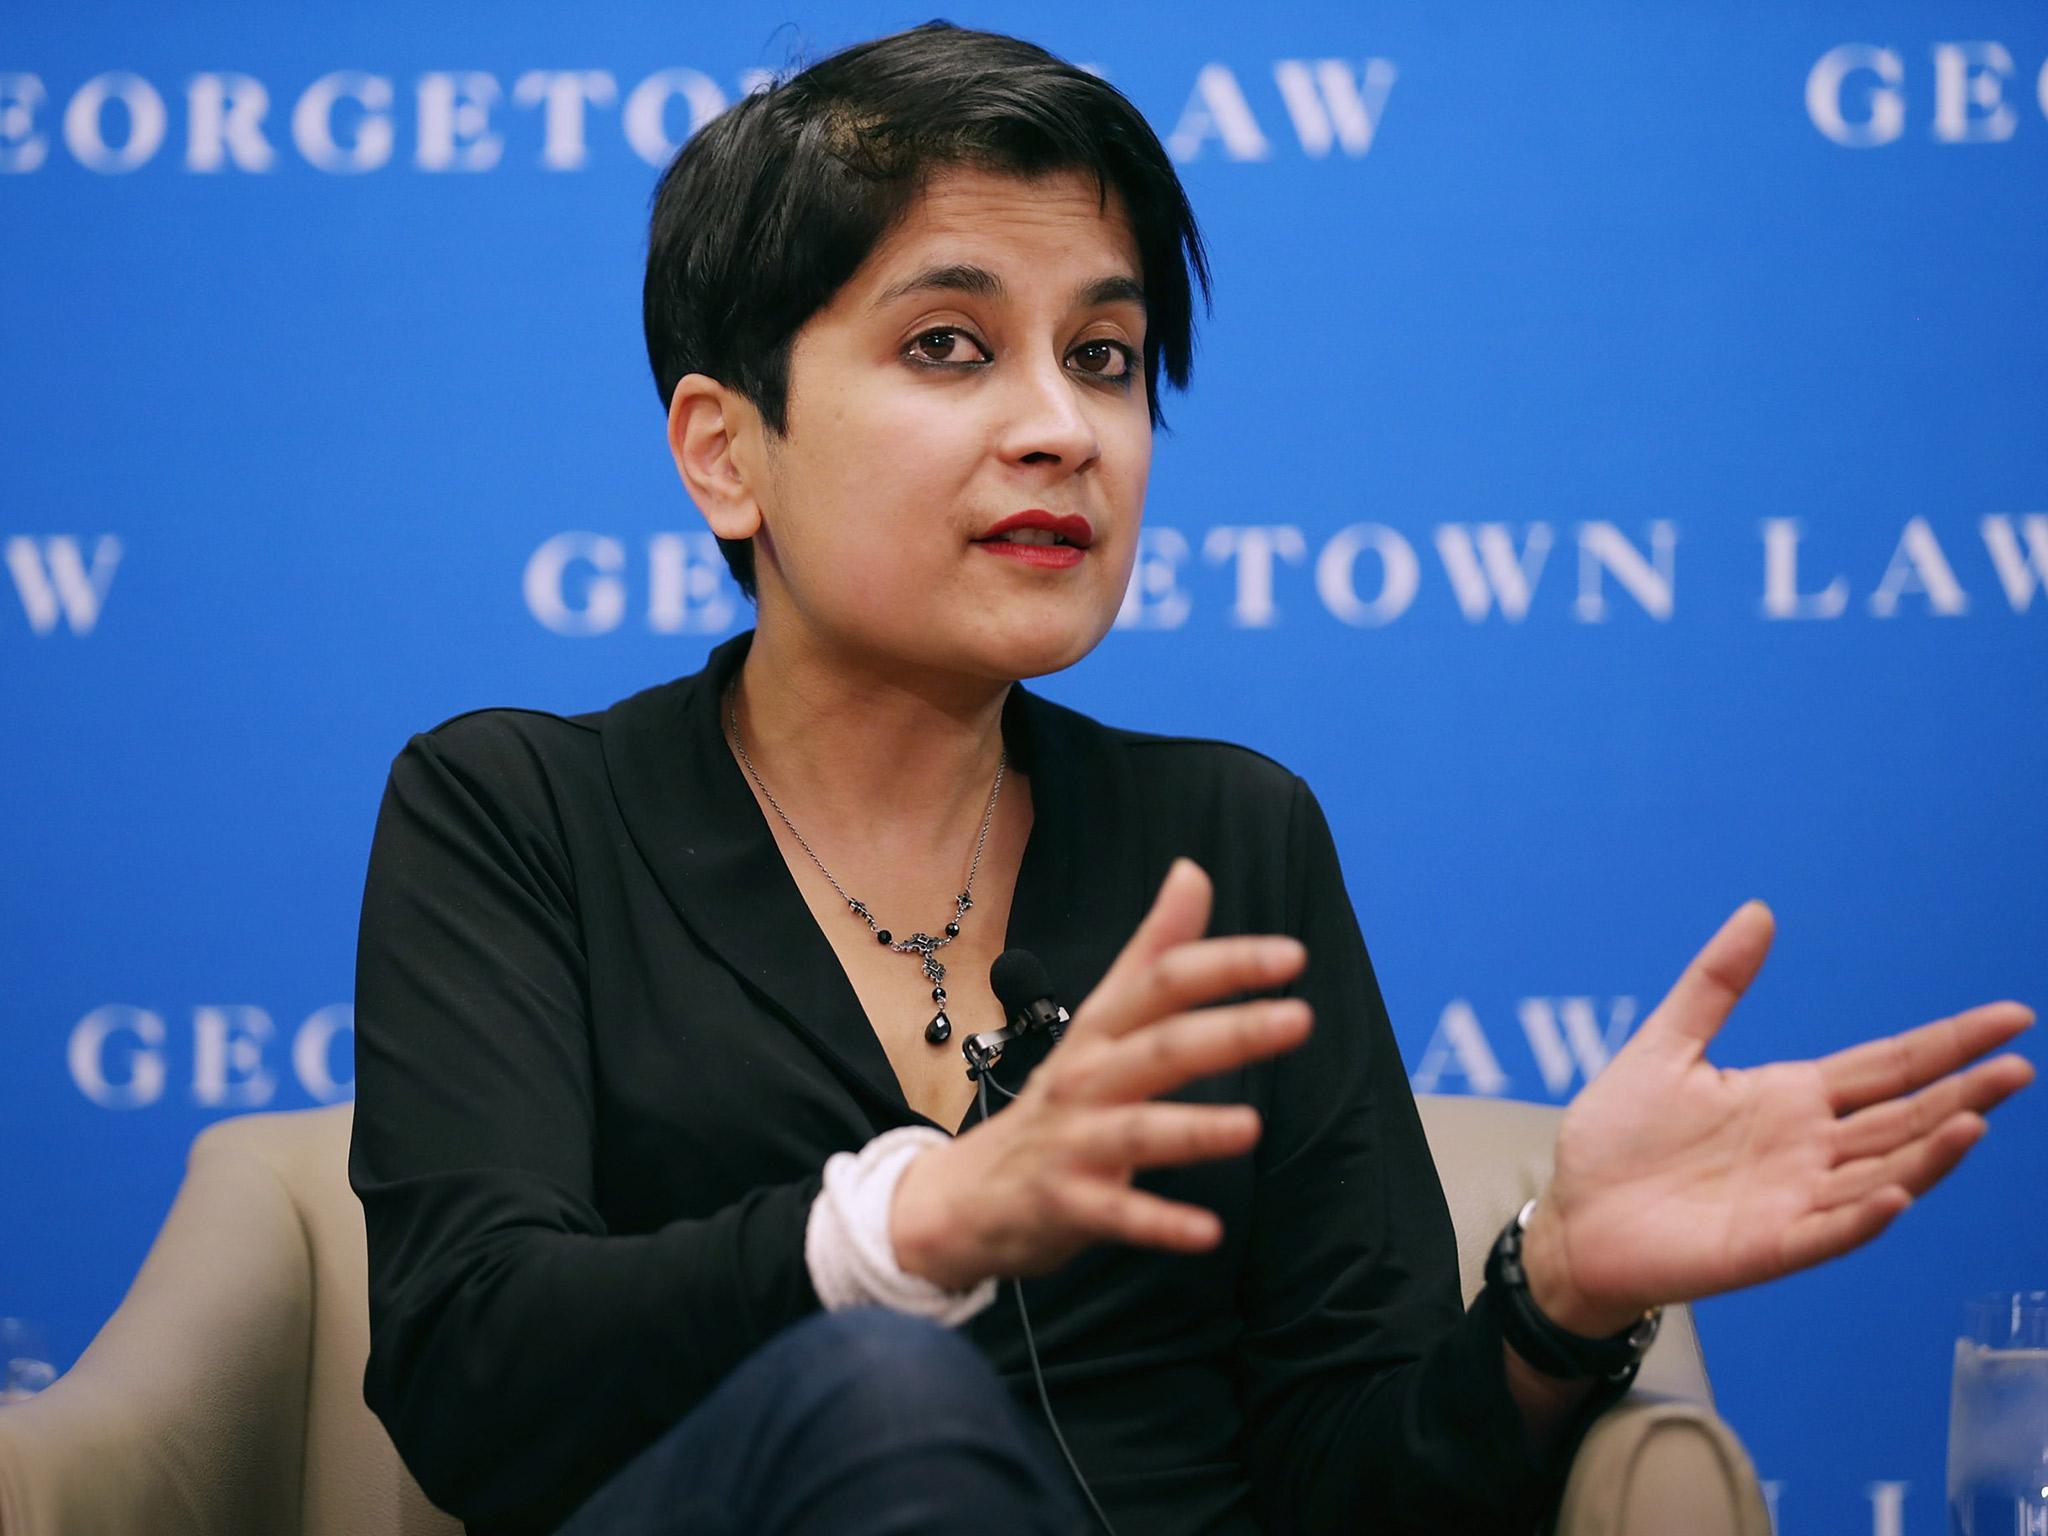 Shami Chakrabarti also claimed it was time to evaluate the role of privately run prisons in Britain